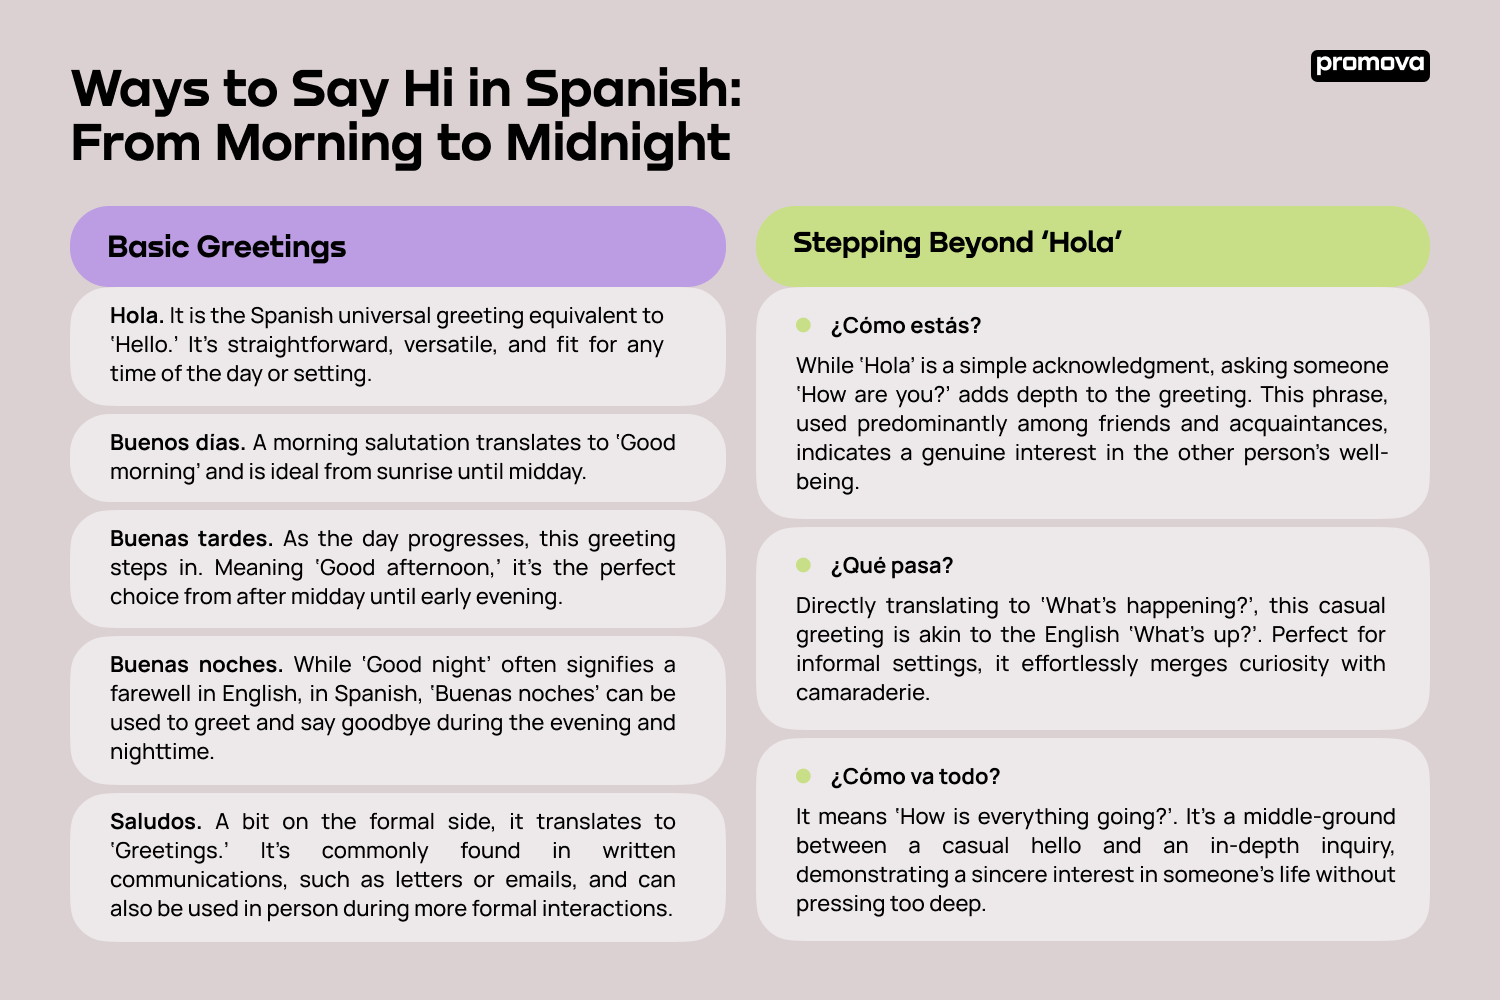 Explore Basic Greetings And Beyond 'Hola' in Spanish